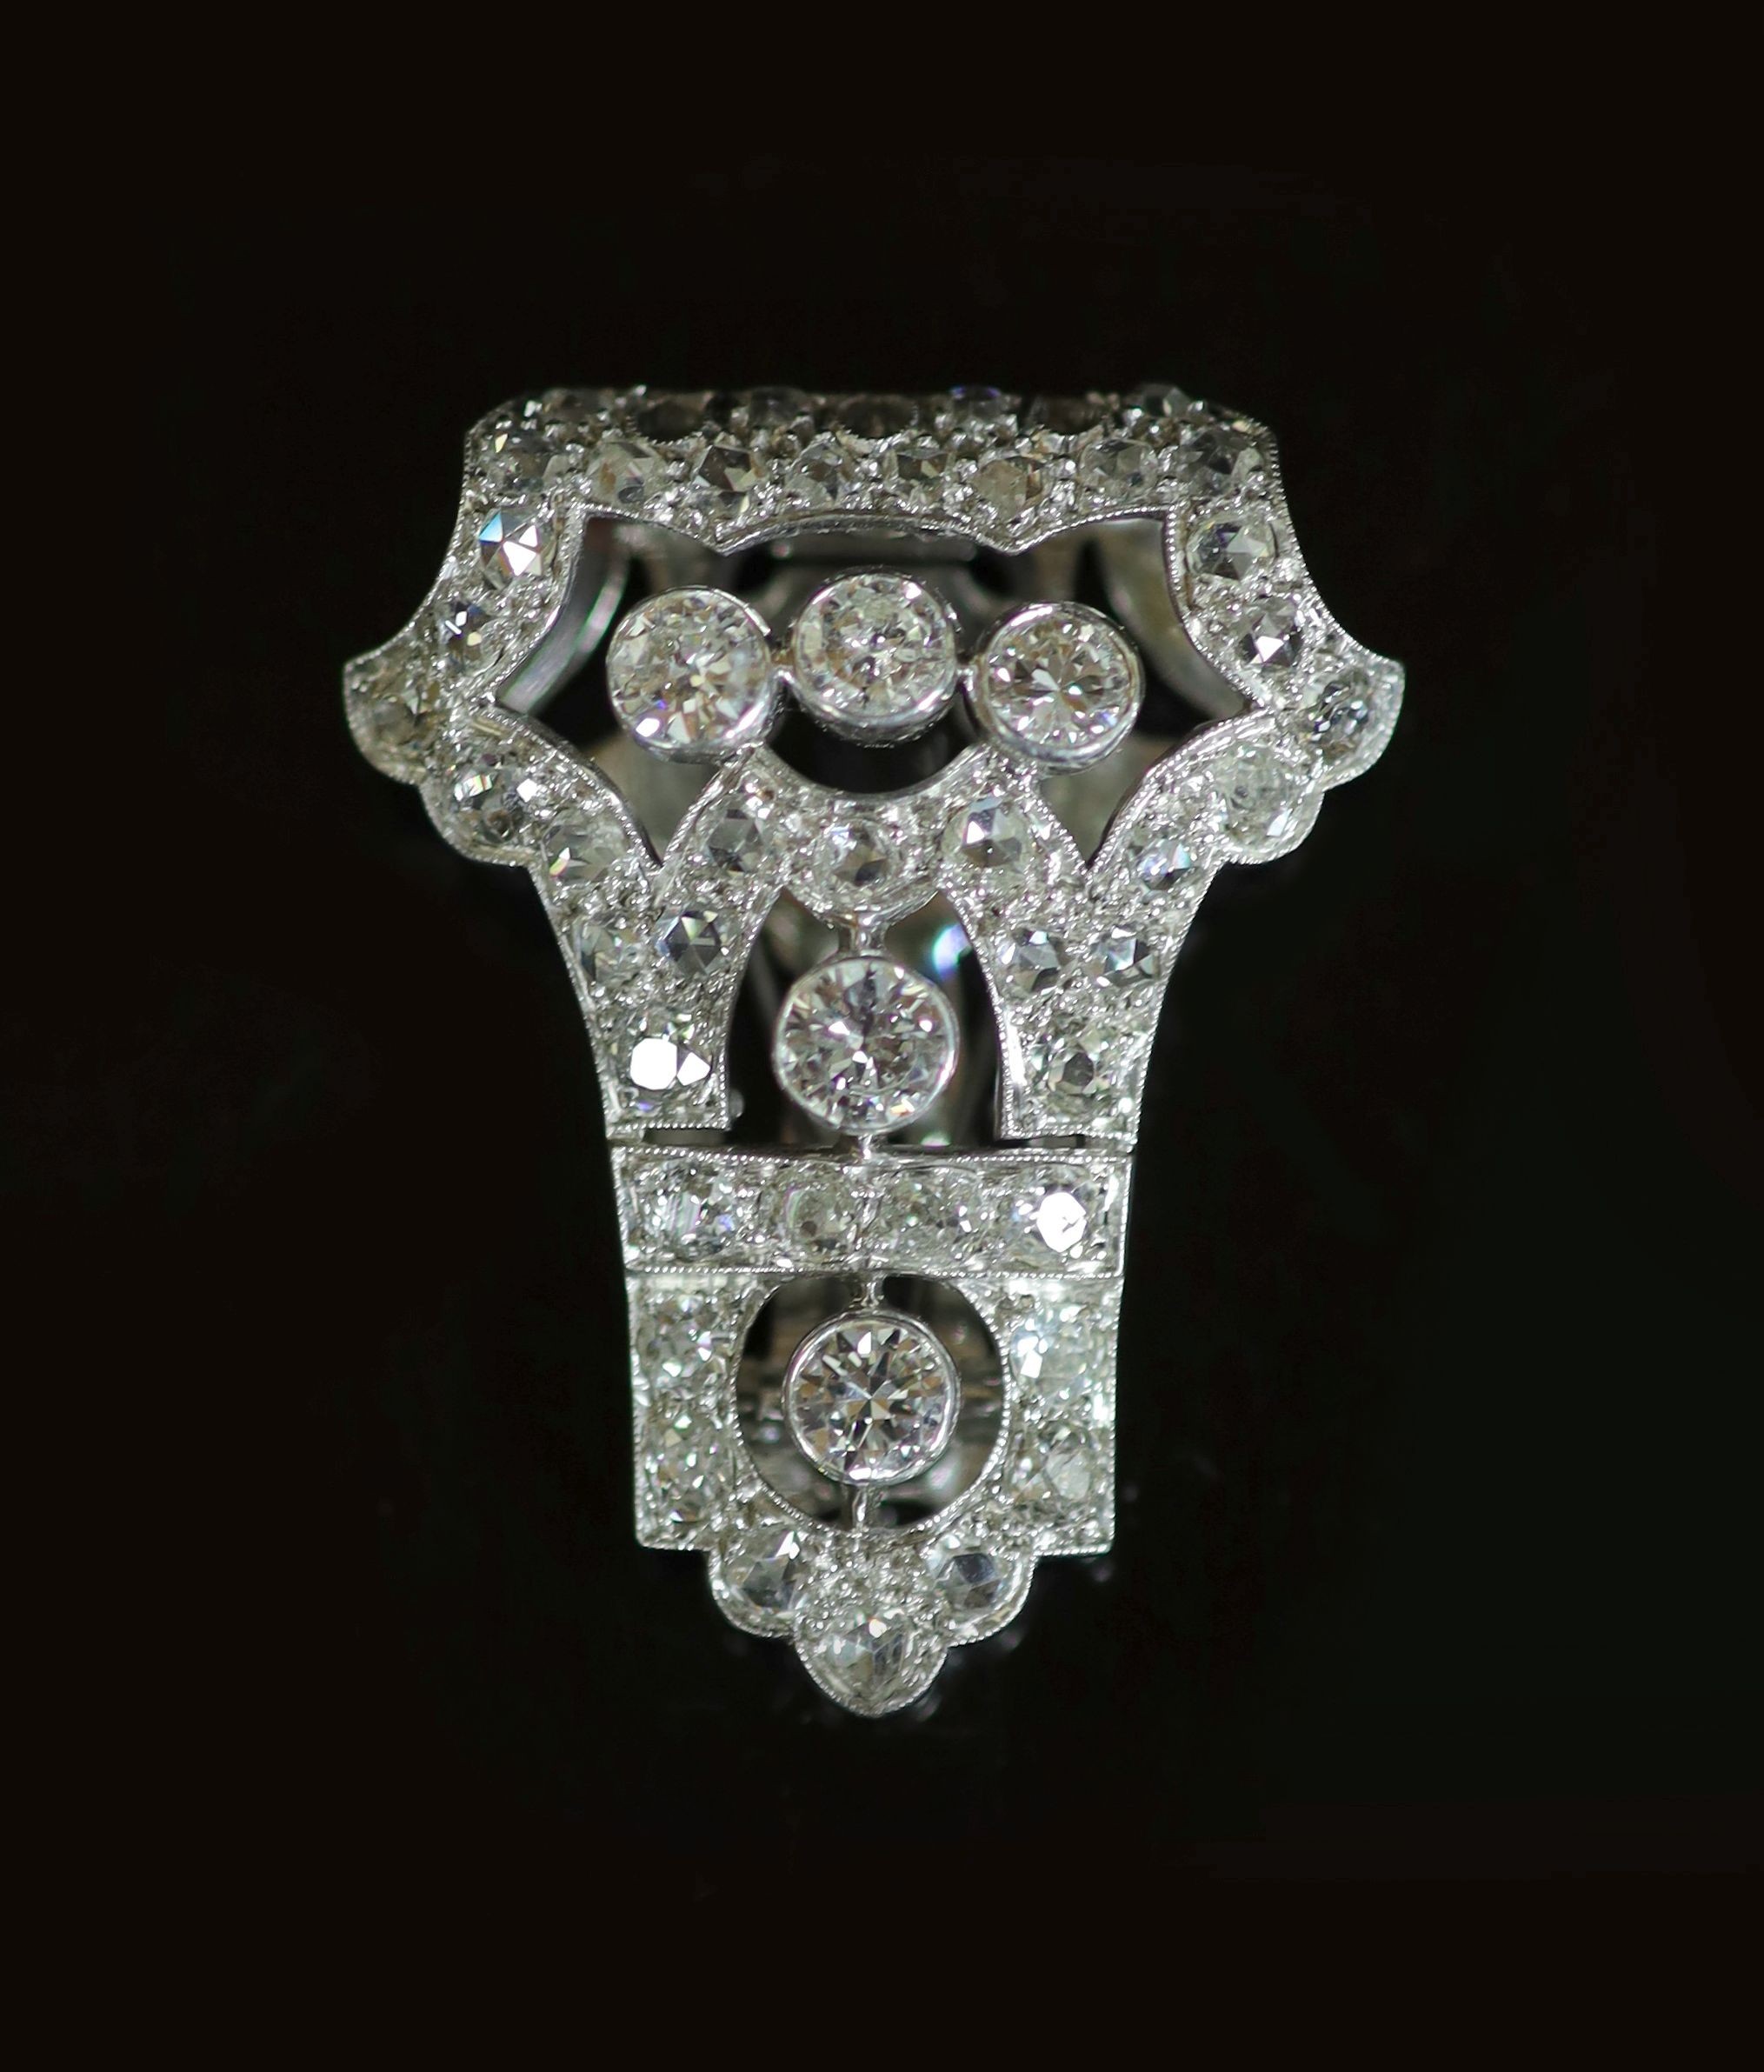 A 1920's/1930's Art Deco pierced platinum and diamond clip brooch,set with round and rose cut